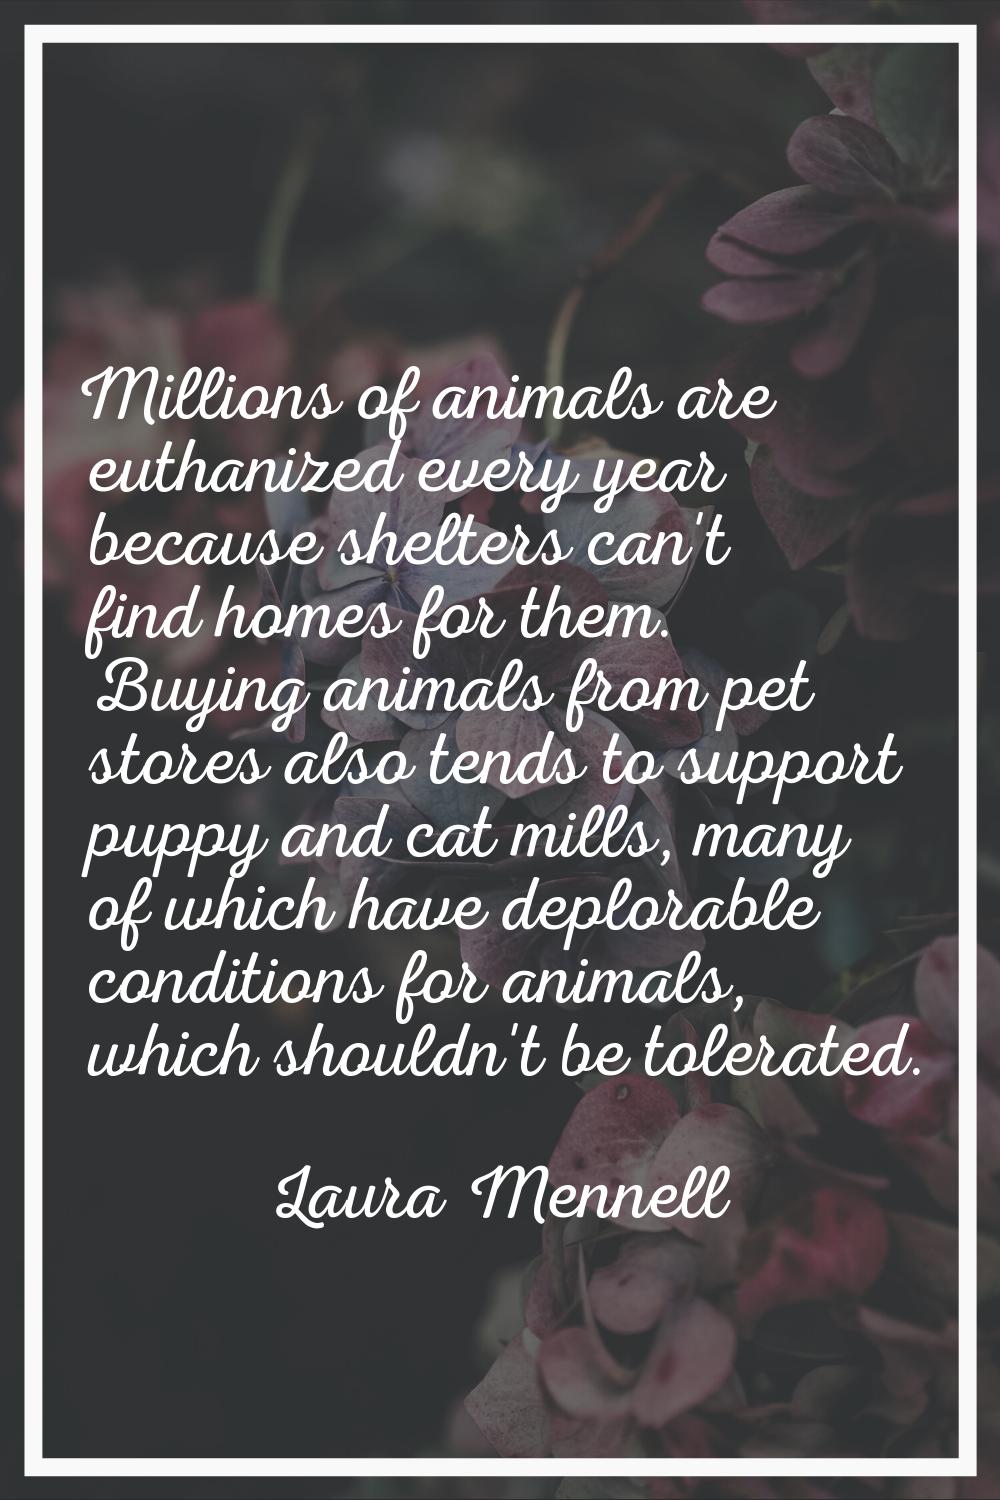 Millions of animals are euthanized every year because shelters can't find homes for them. Buying an